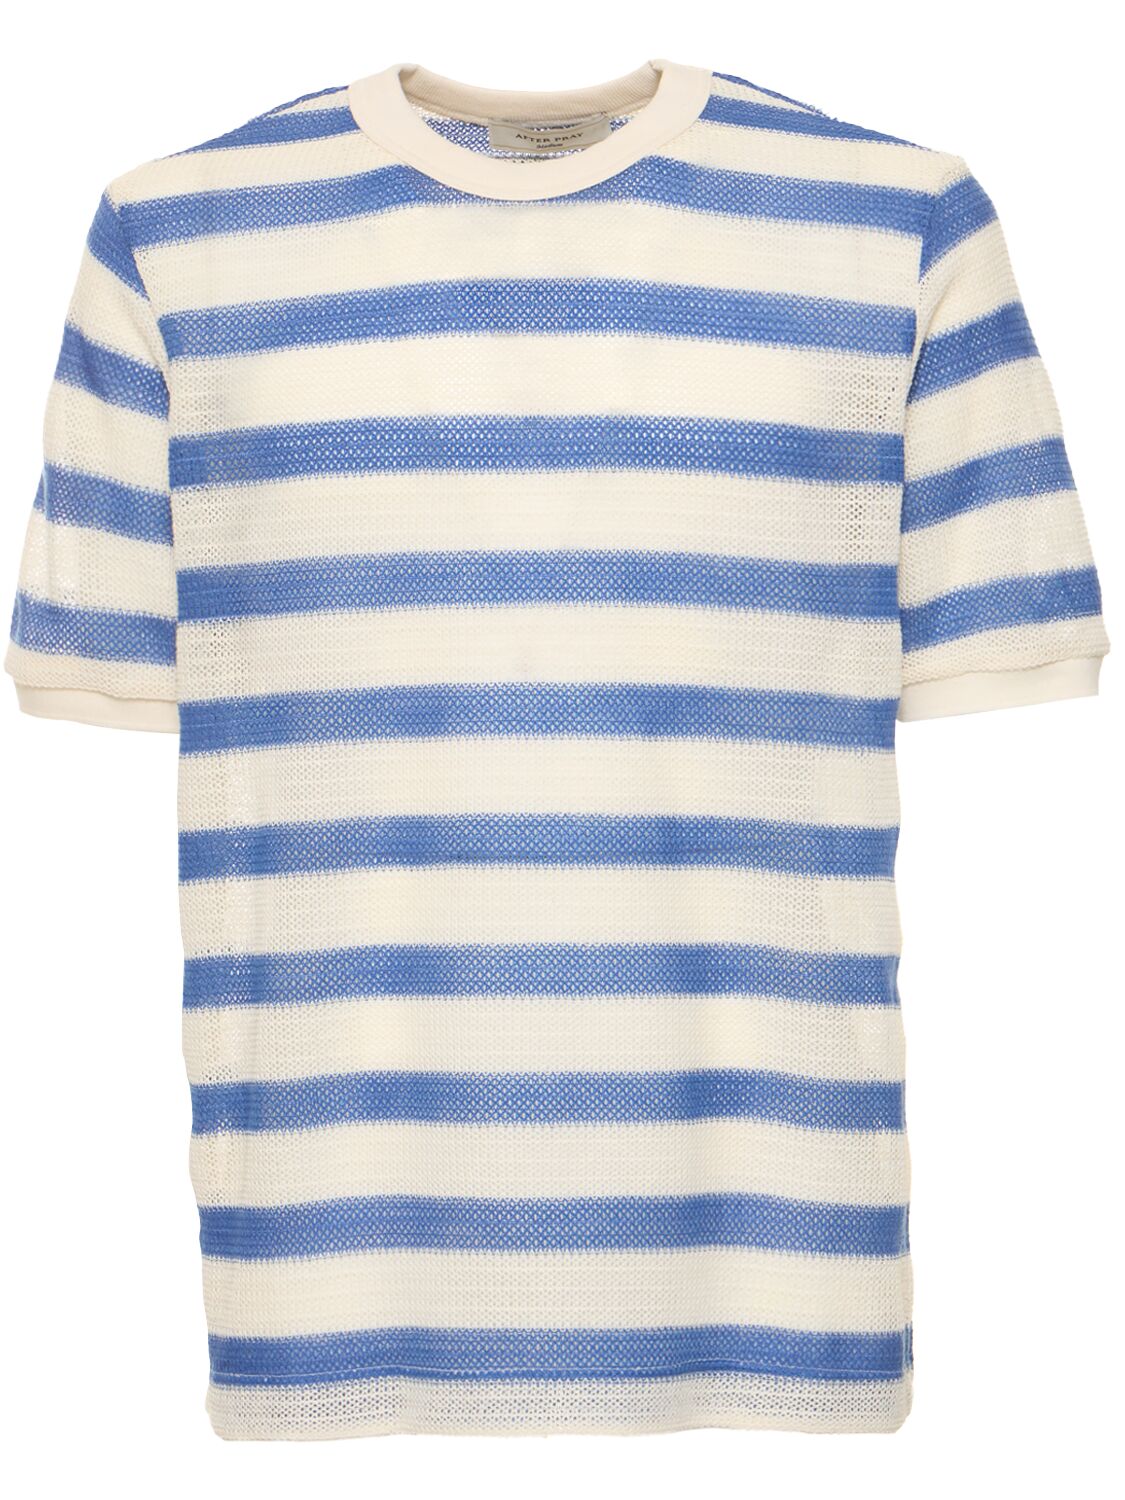 After Pray Striped Mesh Knit T-shirt In Blue